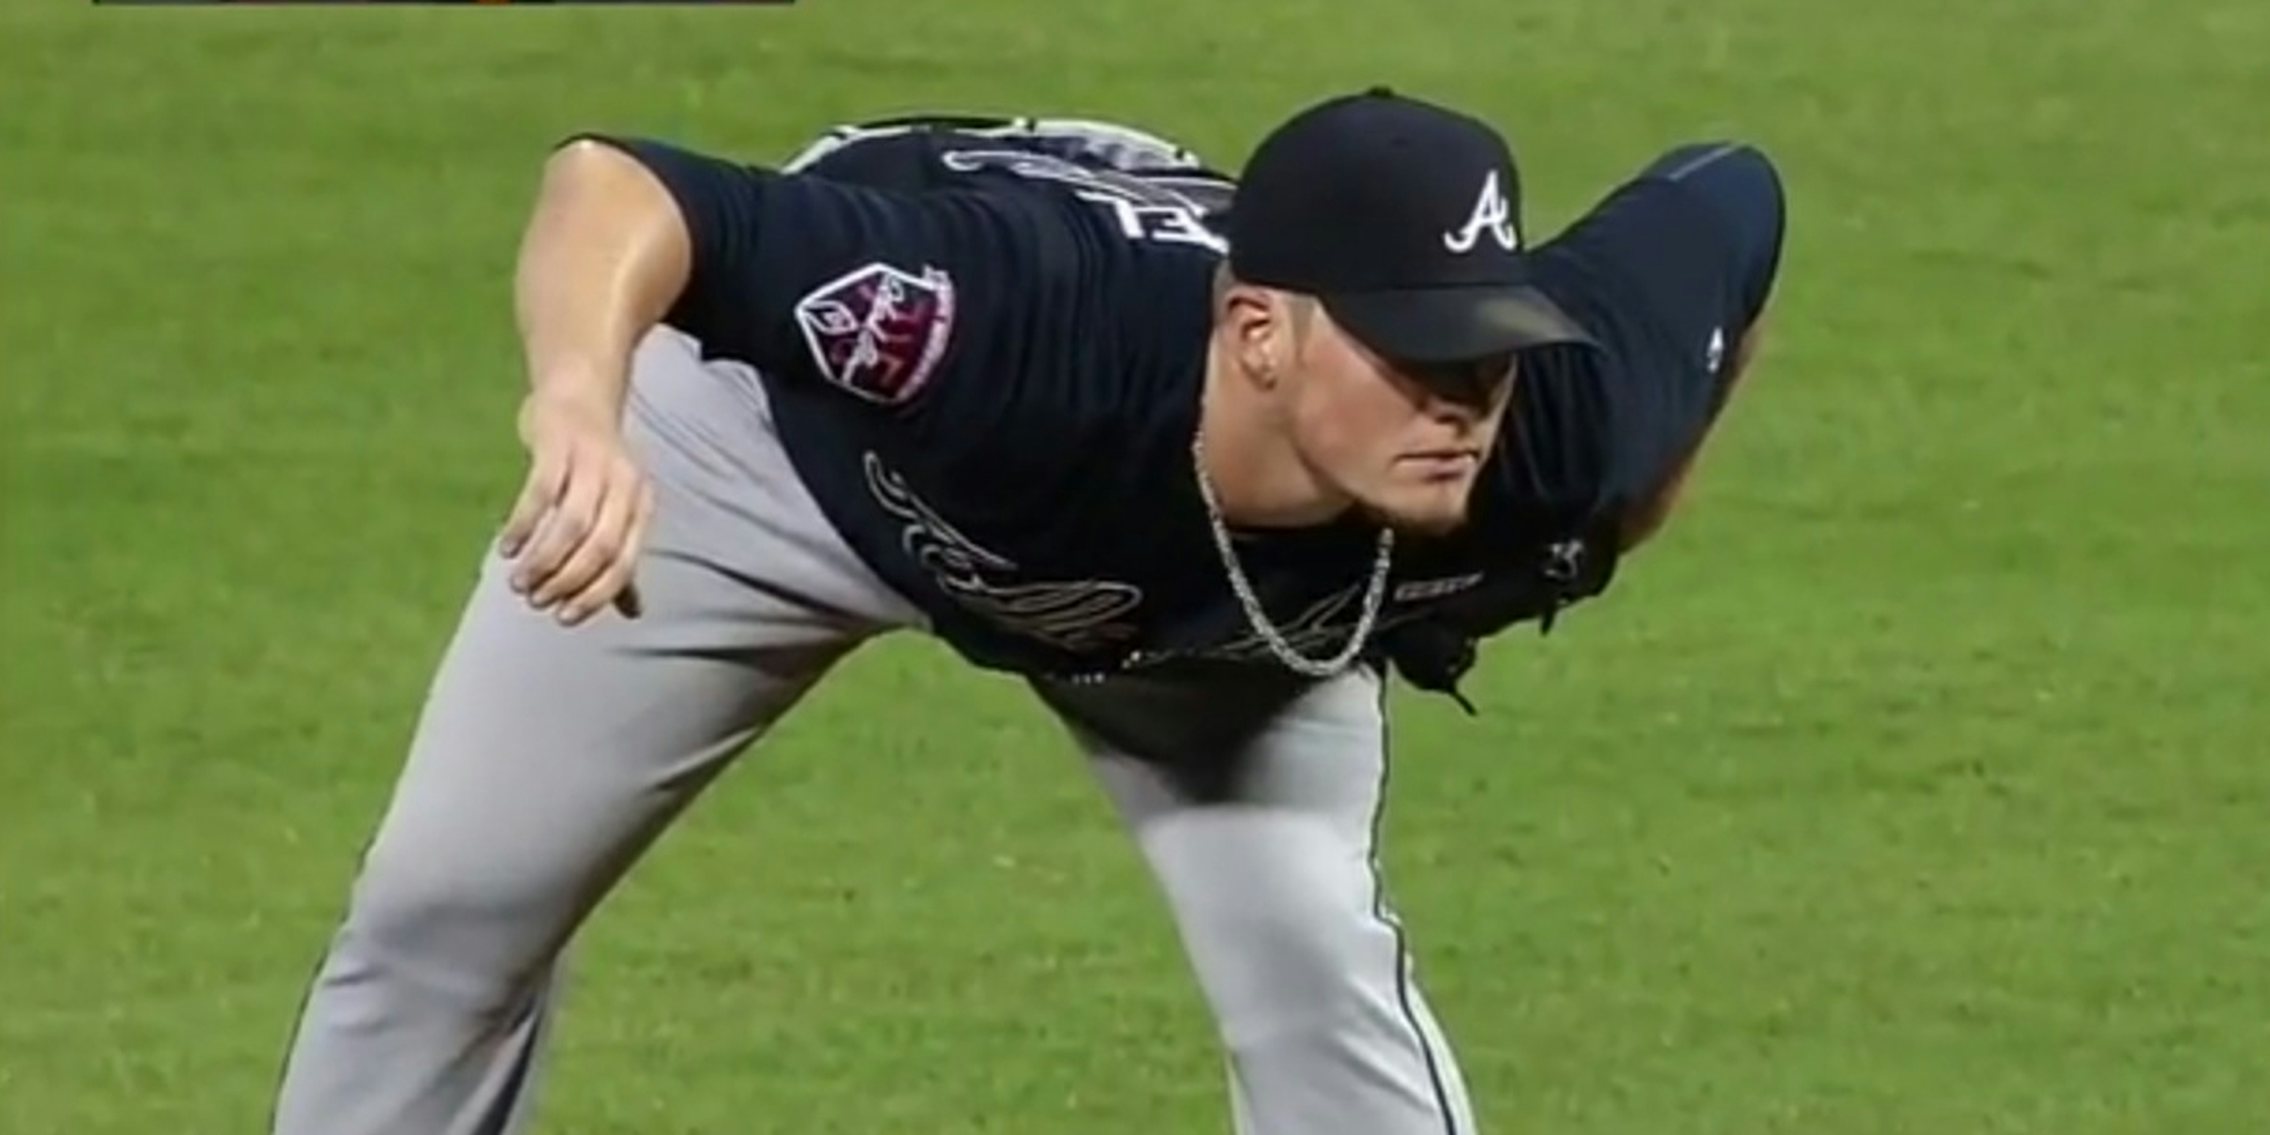 Kimbrel's unique stance mocked by Phillies fans